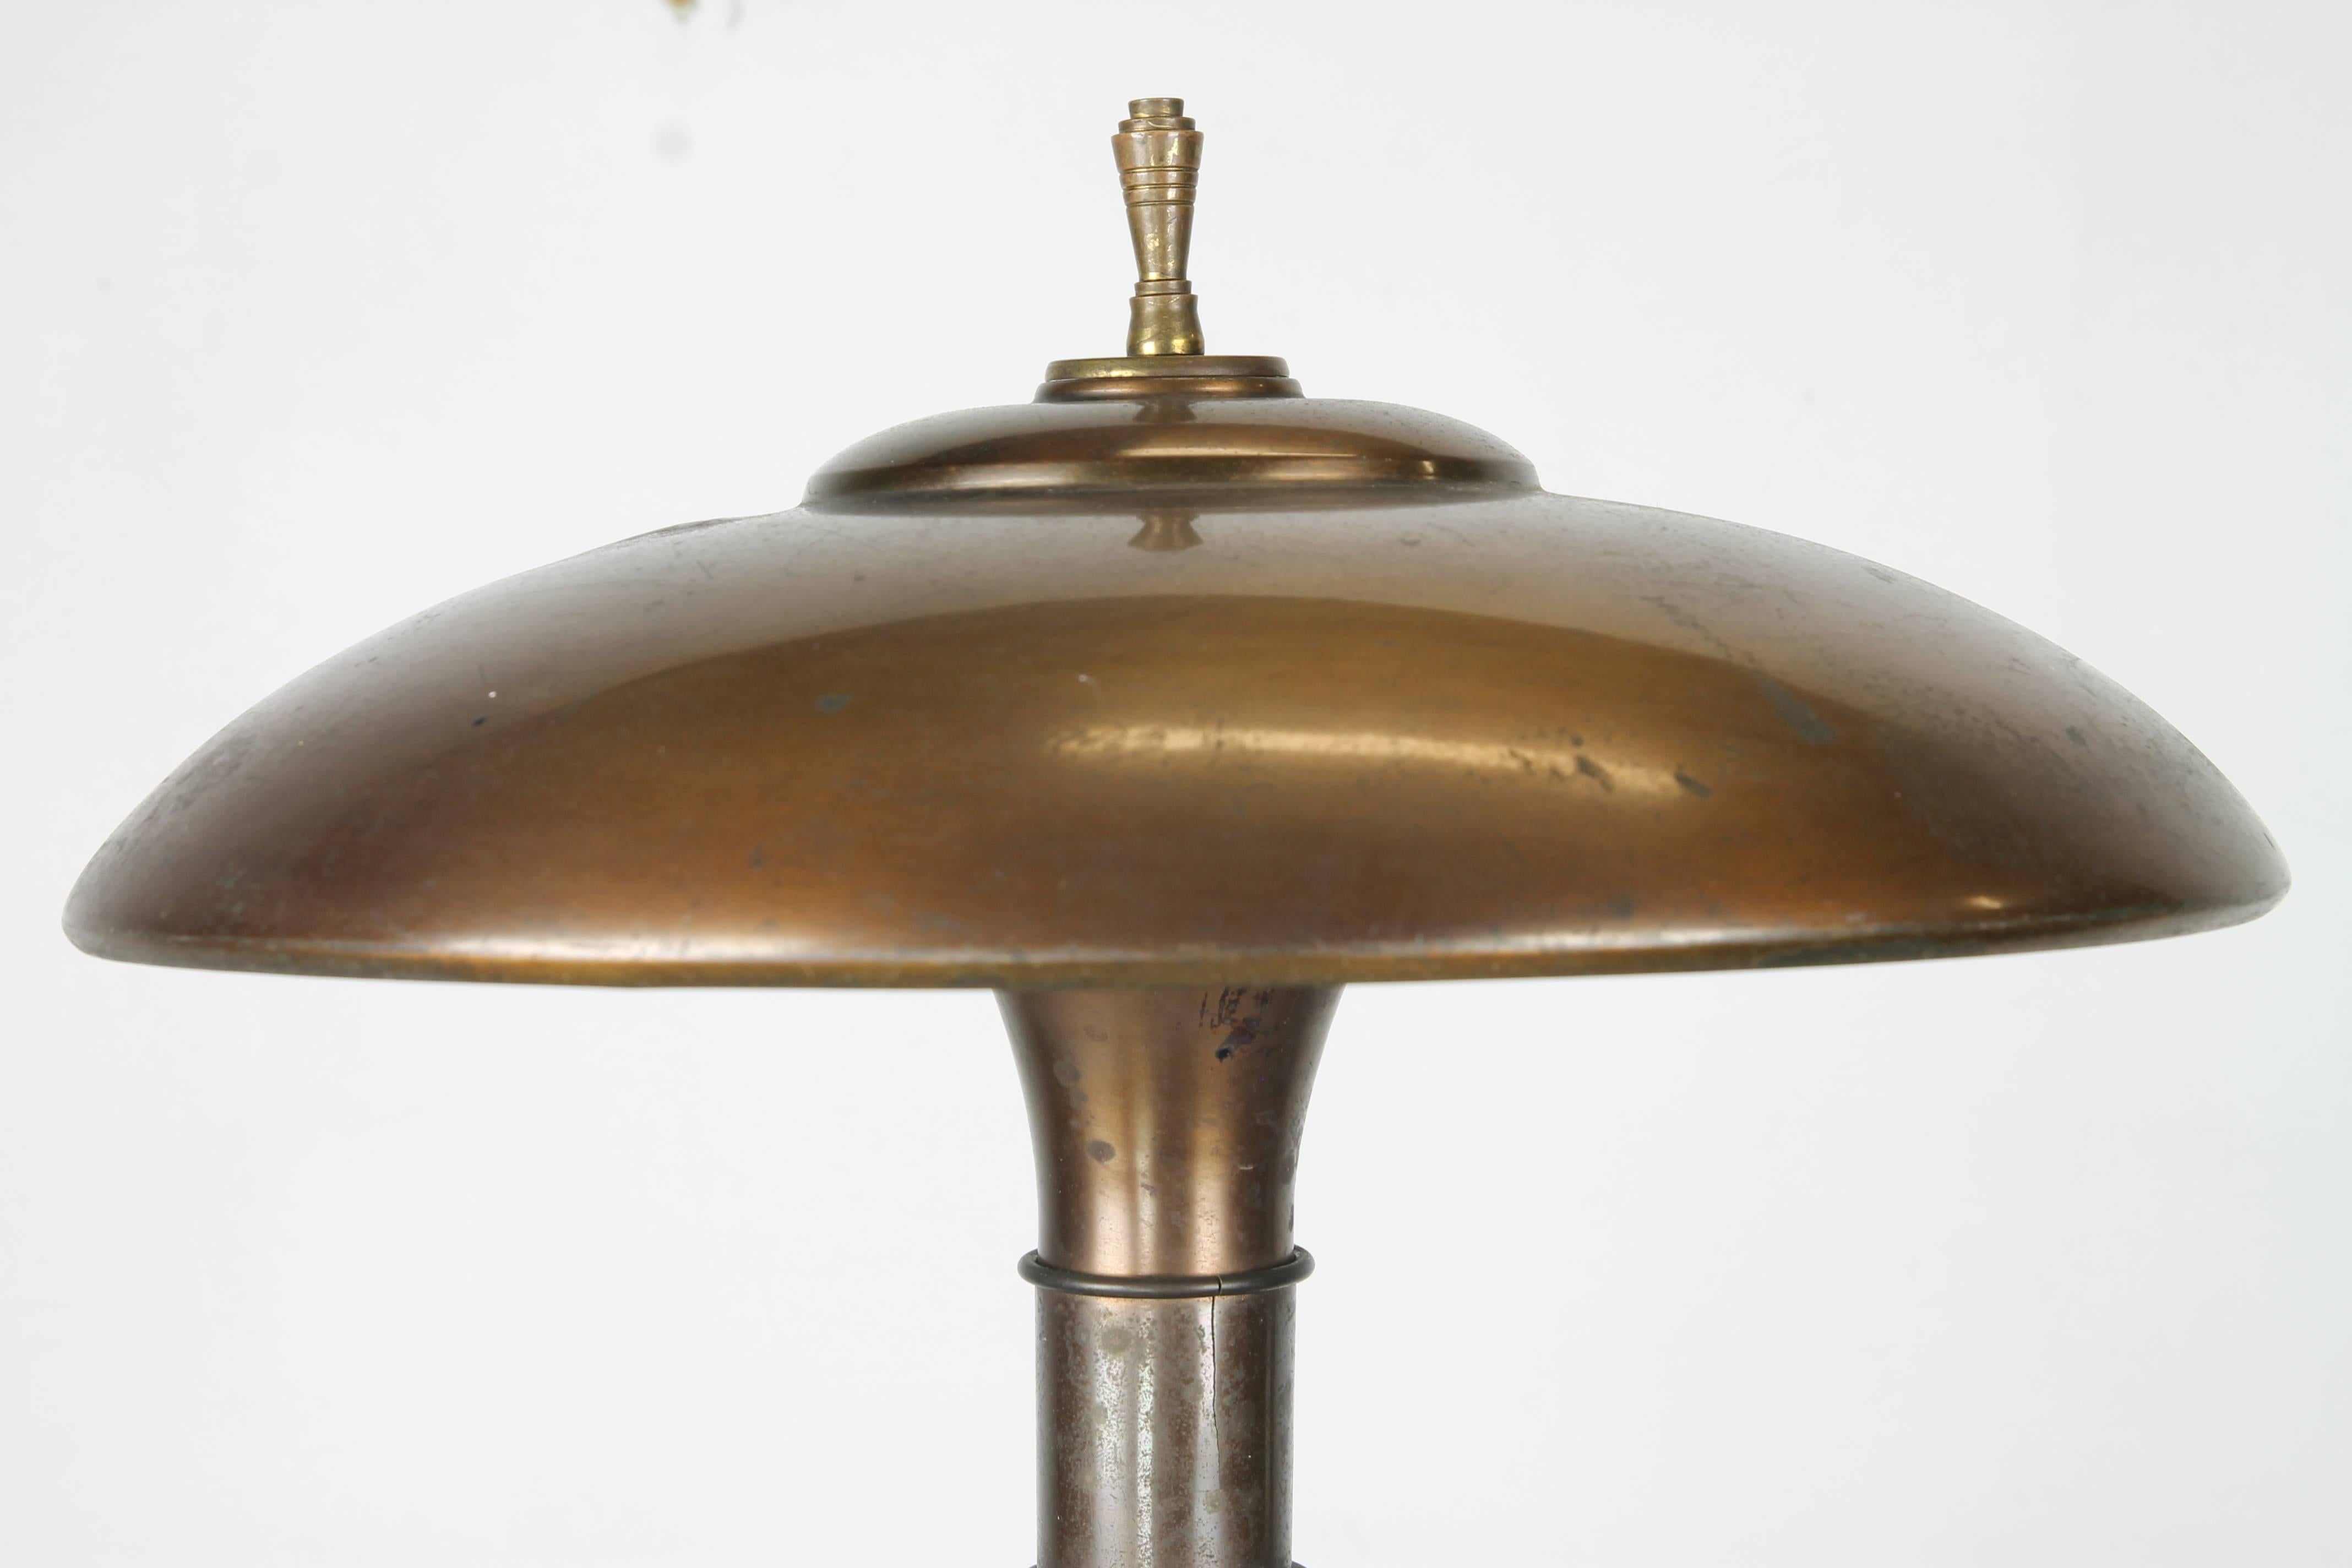 A quintessential American Art Deco table lamp, 'Guardsman Junior' by Bert A. Dickerson for the Faries Mfg. Co. with stacked solid brass skyscraper forms ascending to a spun brass shade and spire-like finial.